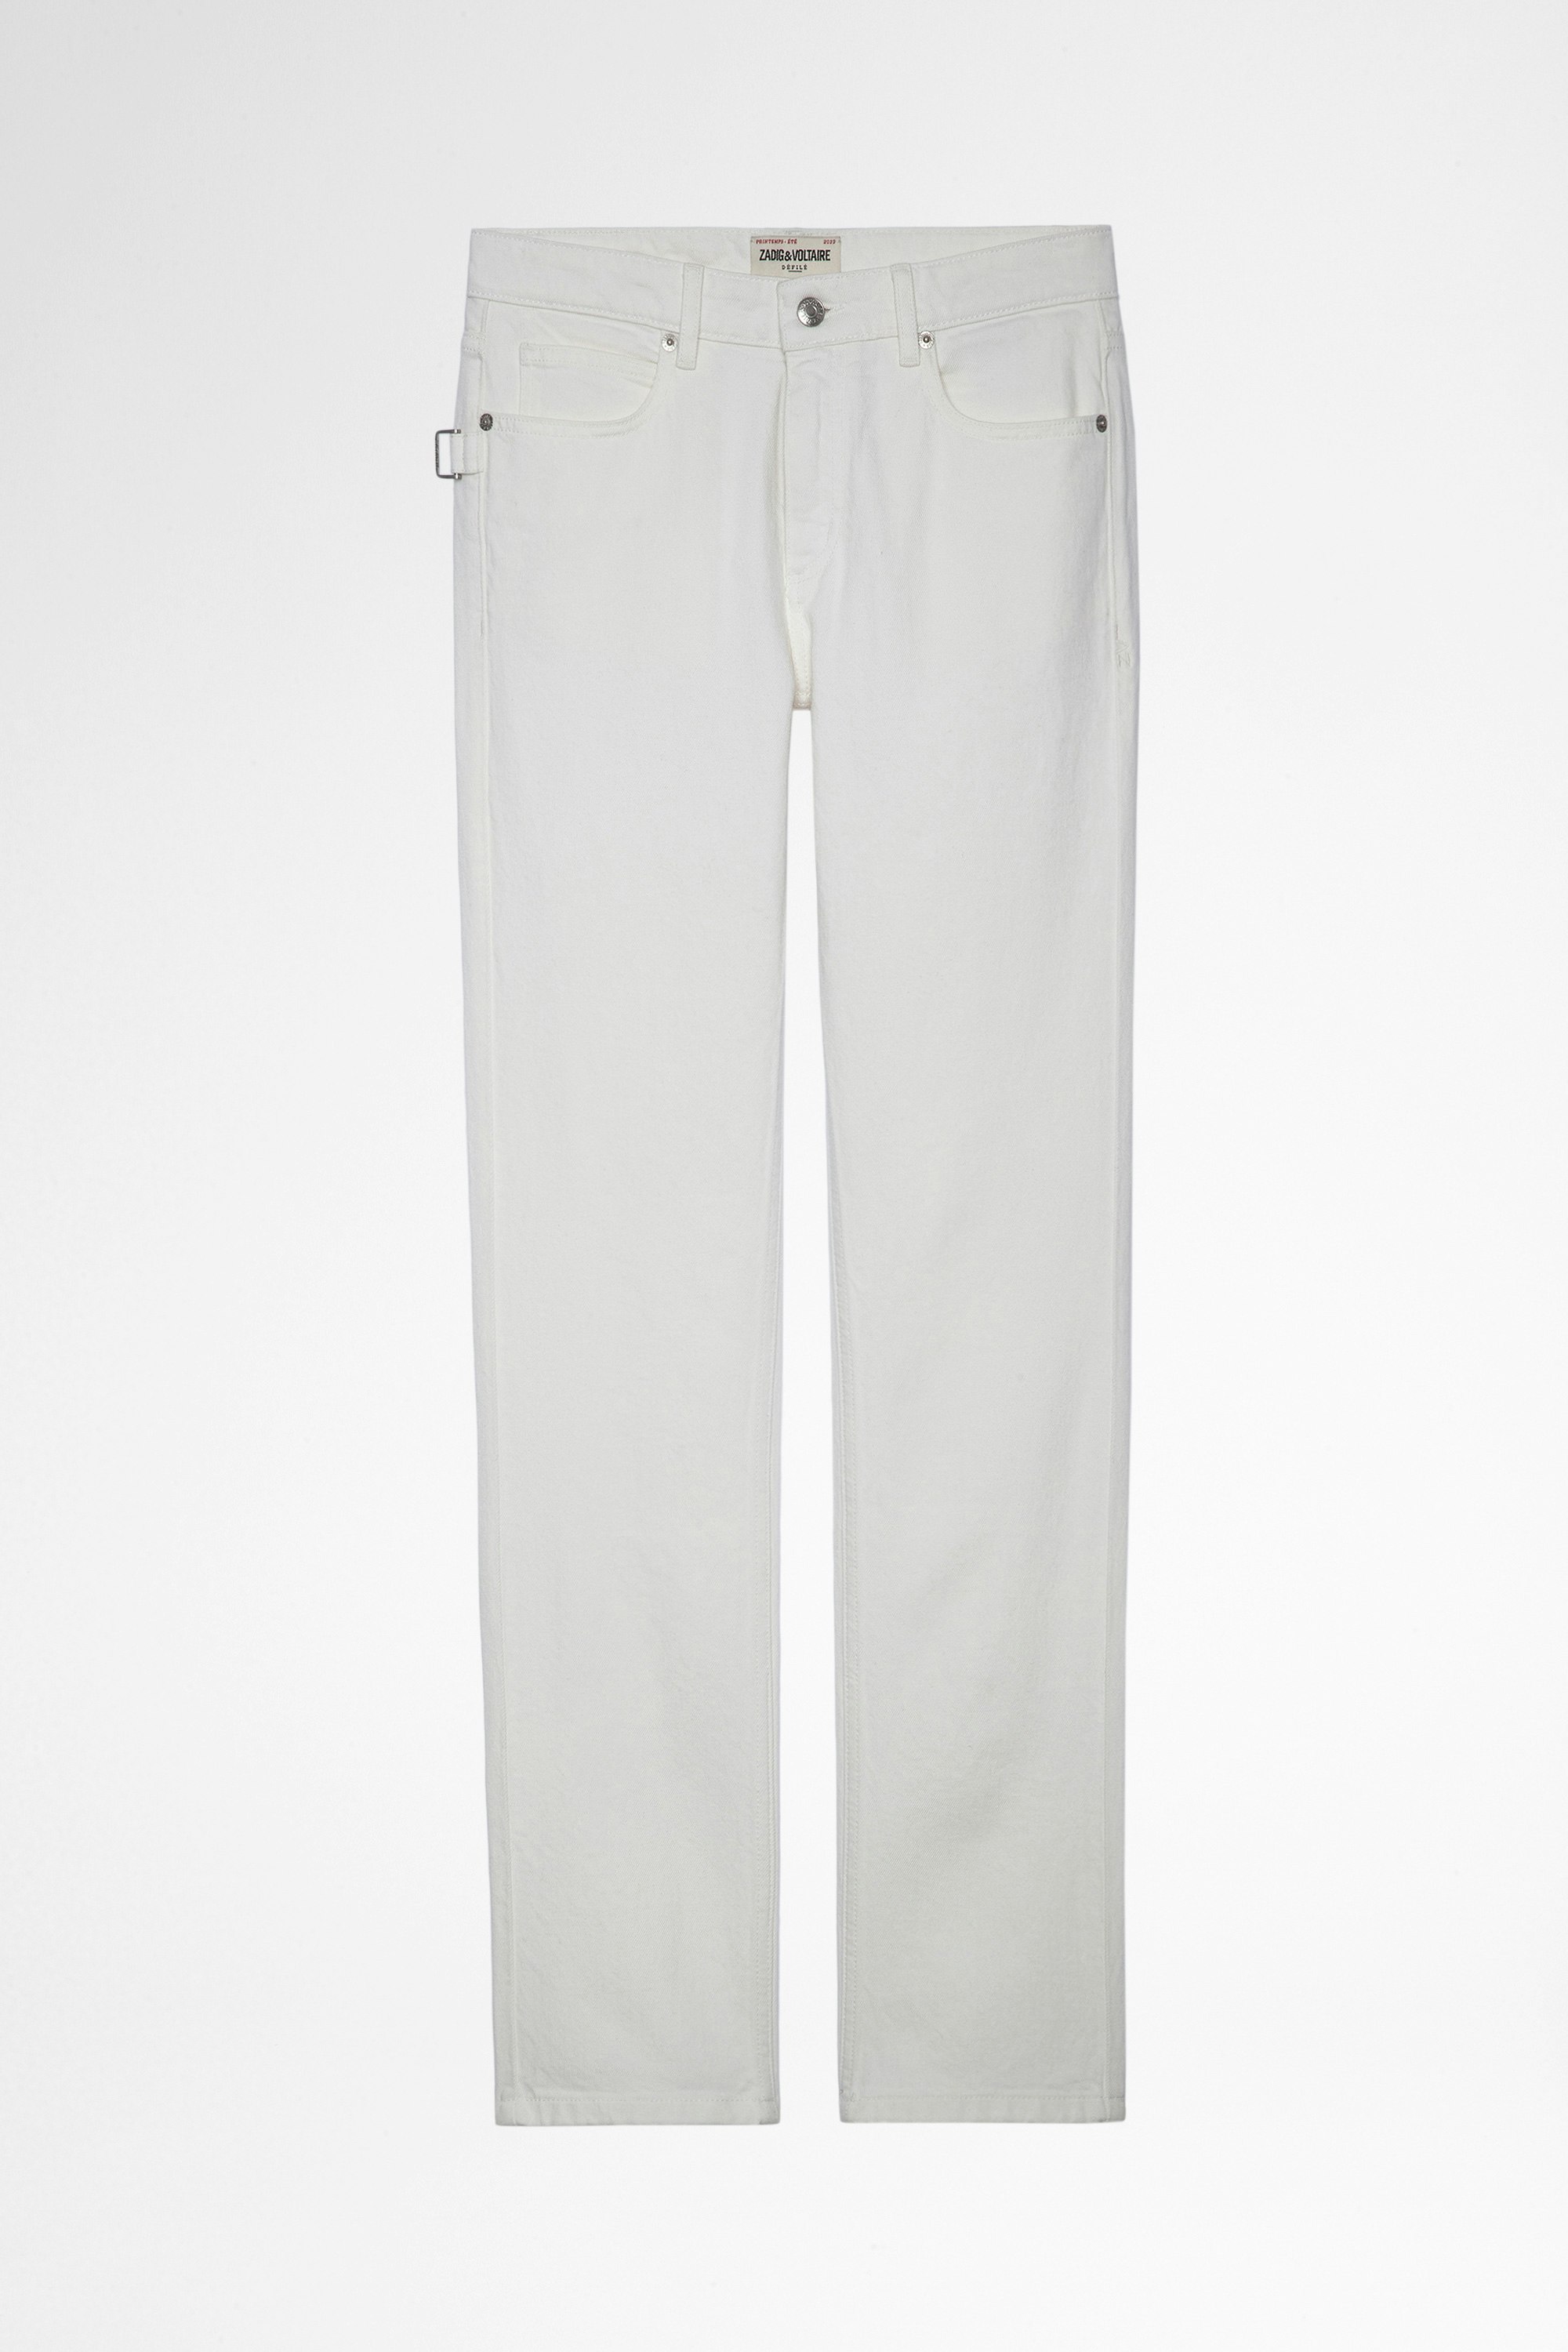 Clint Denim Eco Jeans - Featuring a low-rise waist and straight legs, these jeans offer a slim and relaxed fit.